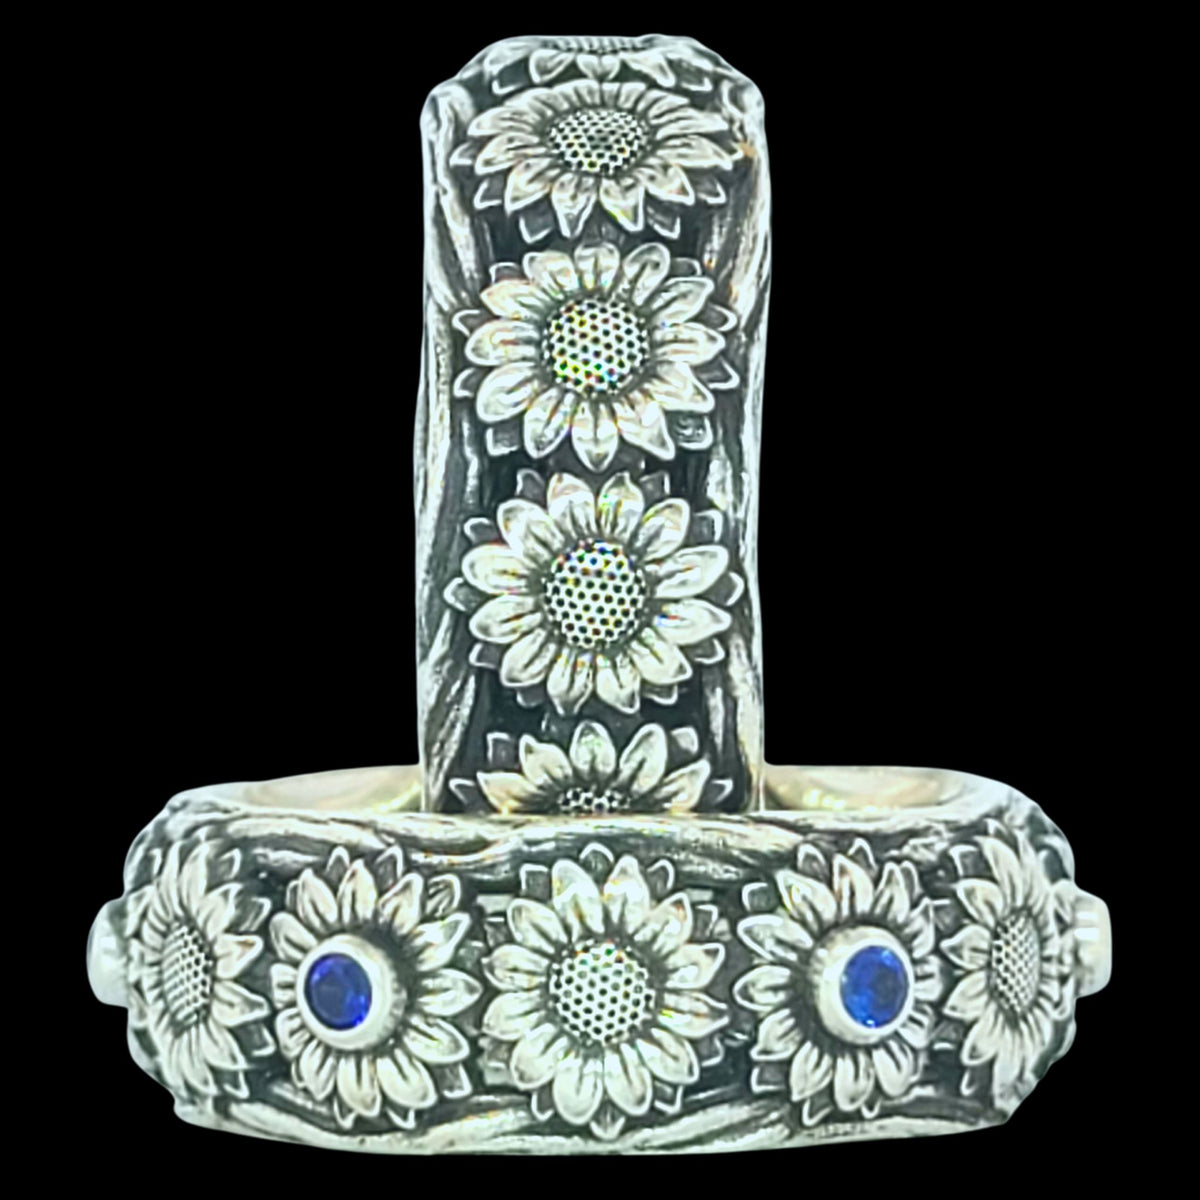 SUNFLOWER BAND RING in GOLD with CHOICE of Six 2mm GEMSTONES - Starting at $1049